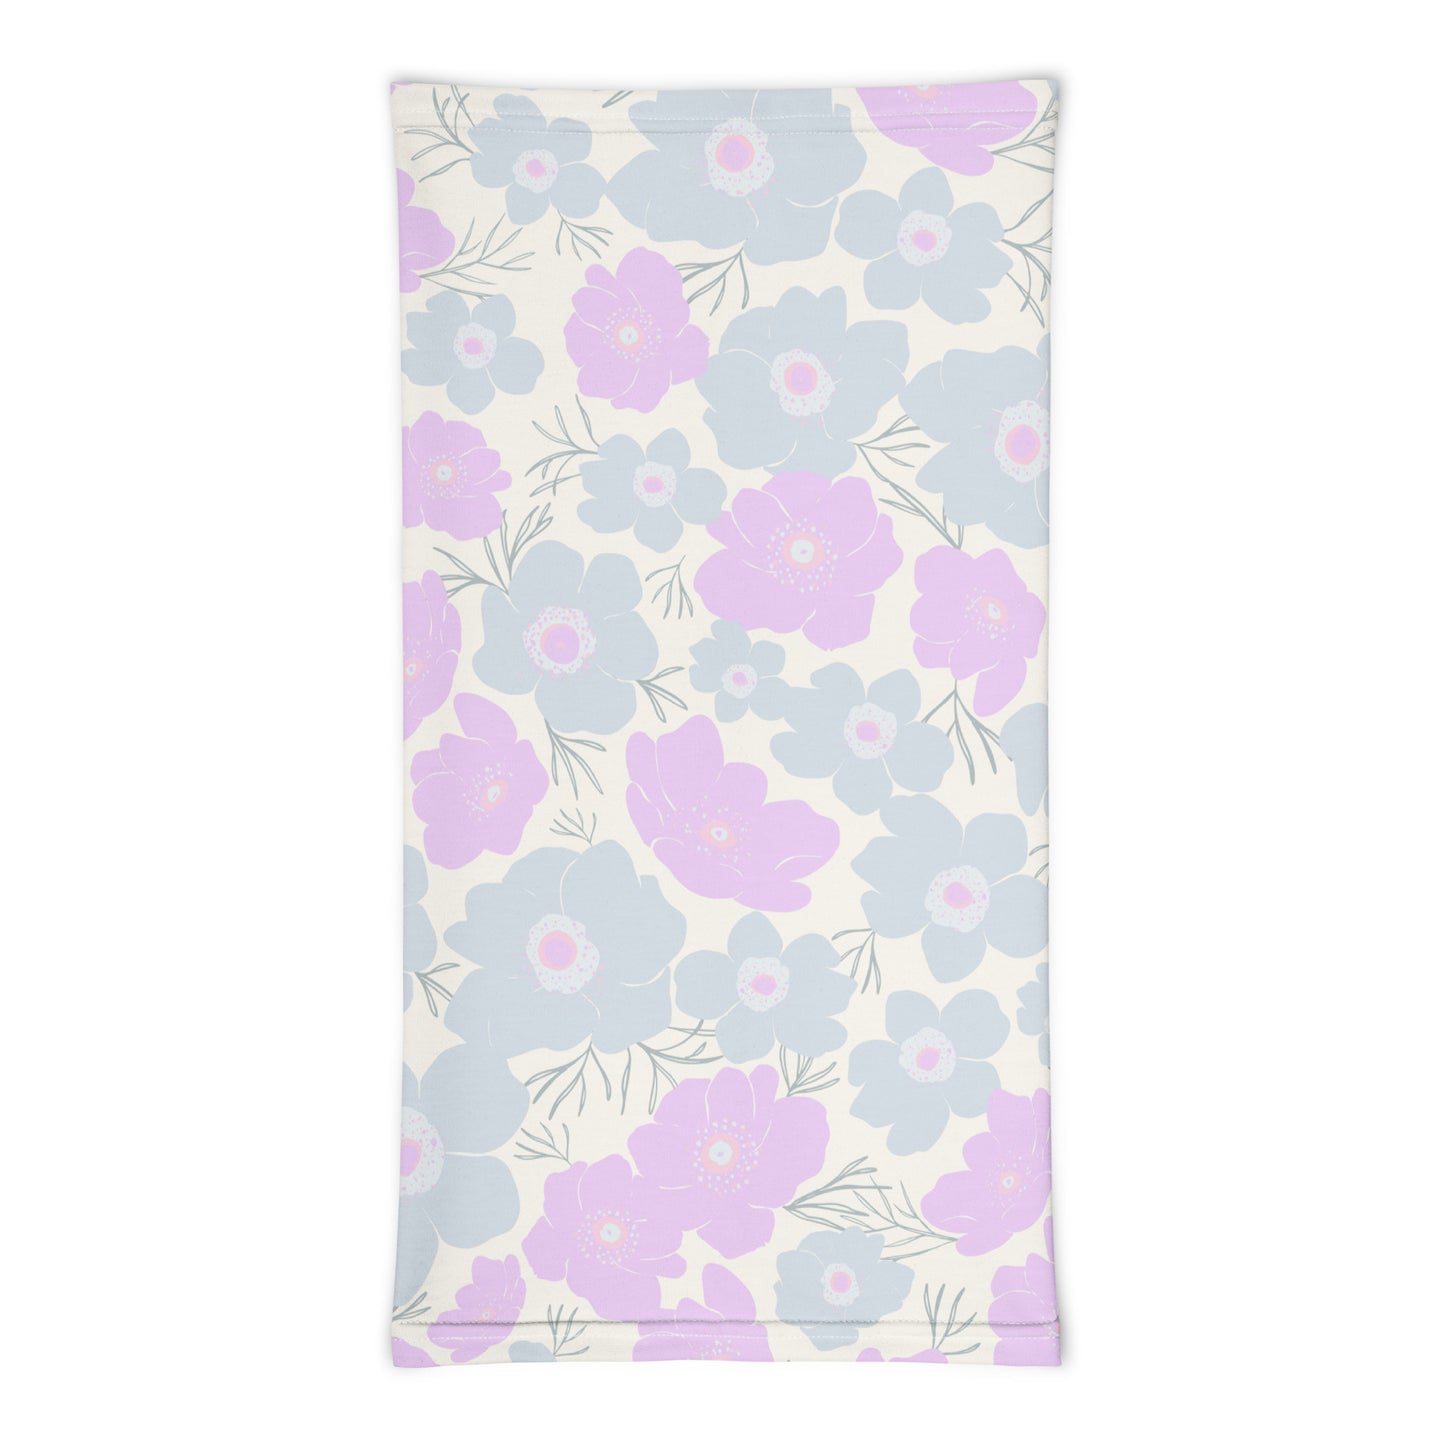 Pastel Floral - Sustainably Made Neck Gaiter